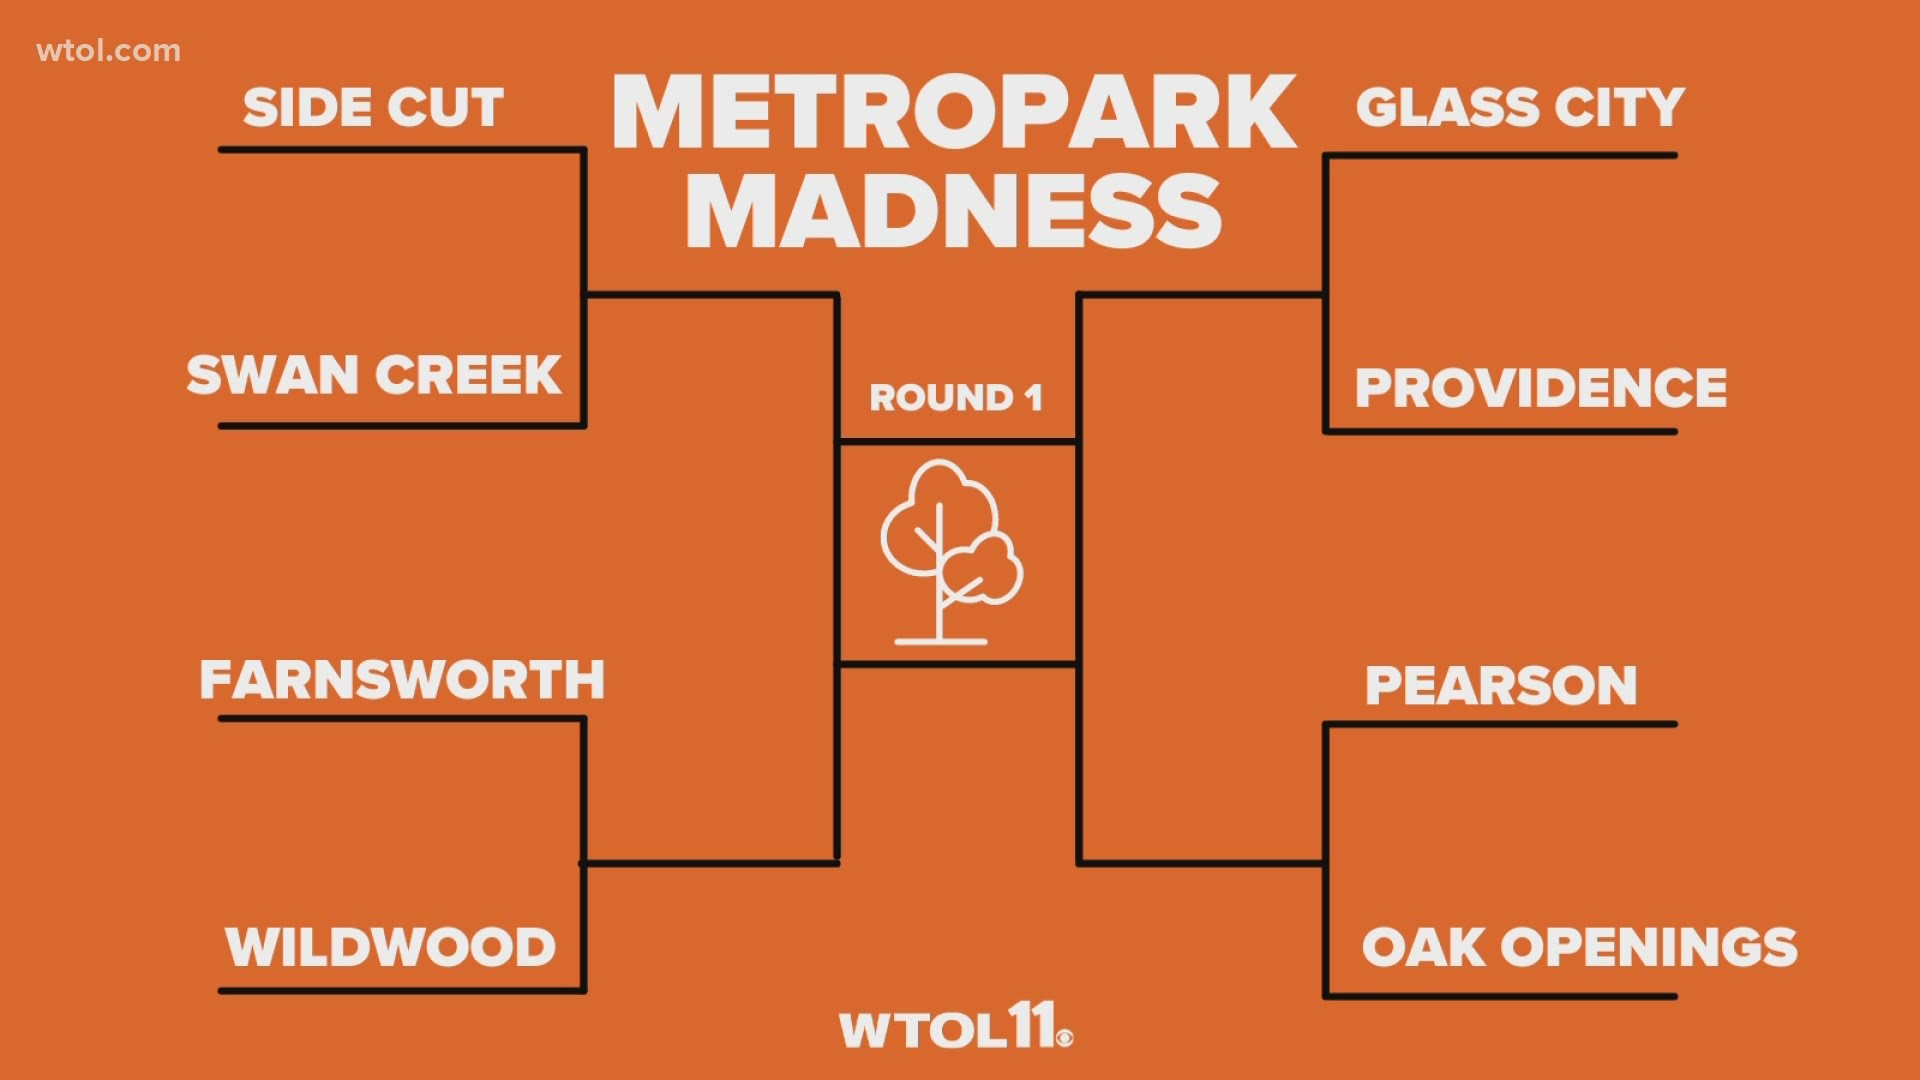 We've got a bracket of the Great 8 for you to rank! Check out the Metropark Madness bracket challenge on our social media and vote for your favorite.